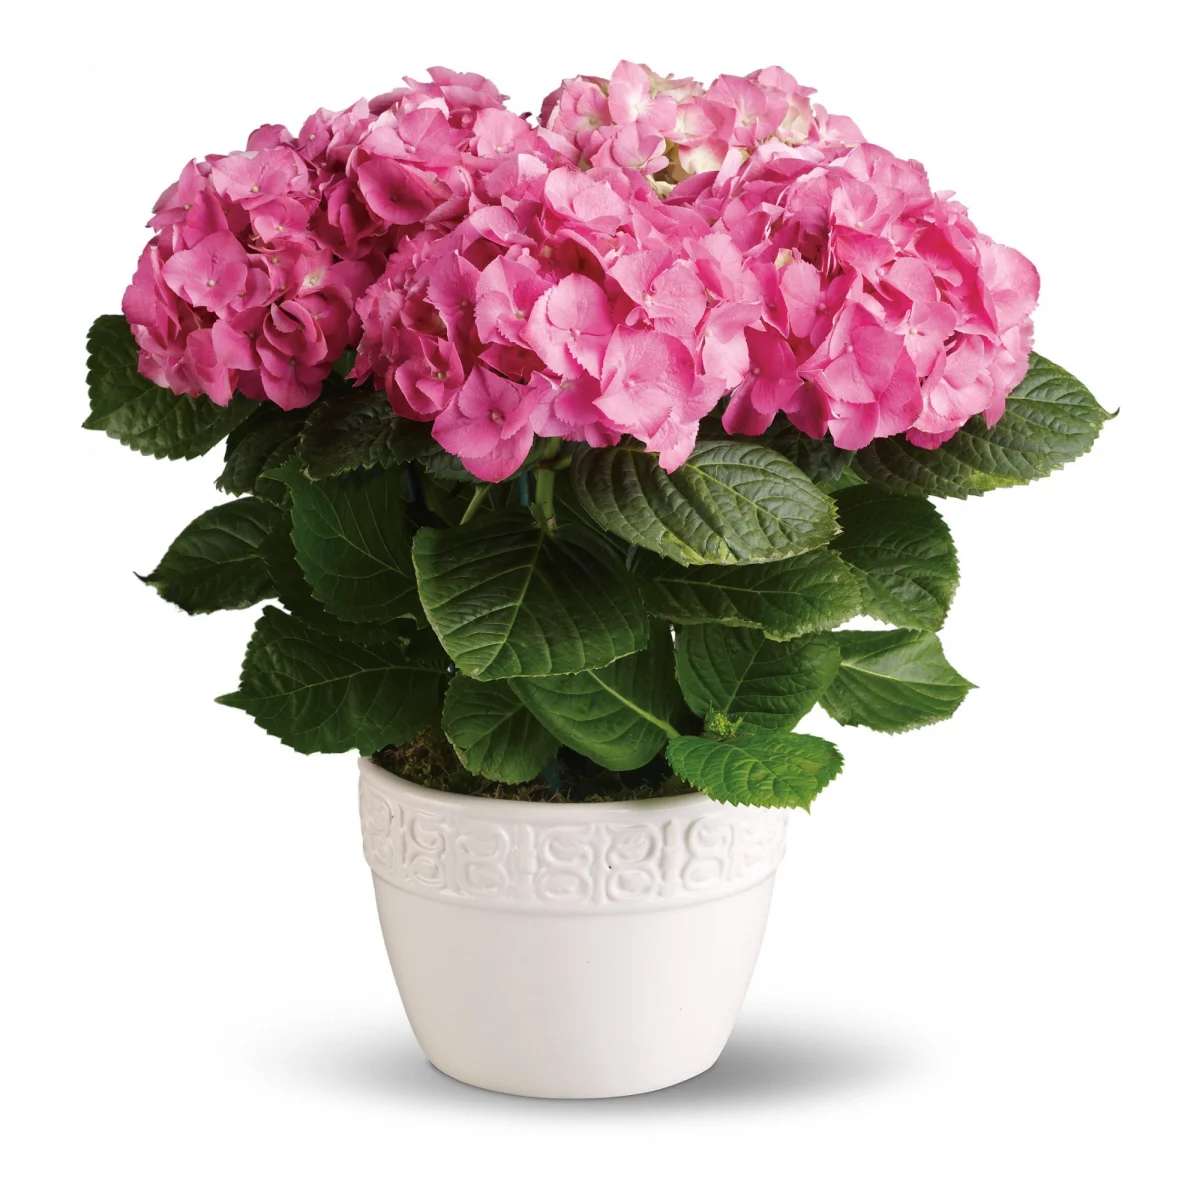 Happy Hydrangea - Pink - Big, beautiful blossoms of pretty petals make the pink hydrangea a popular gift. Always appreciated, this versatile selection is perfect for a birthday, housewarming, thank-youâ¦whatever. Beautiful to look at and easy to grow, no wonder it's America's darling.  A lovely pink hydrangea is delivered in a fresh white ceramic pot. Simply charming!  Approximately 18&quot; W x 18&quot; H  Orientation: N/A  As Shown : T89-1A